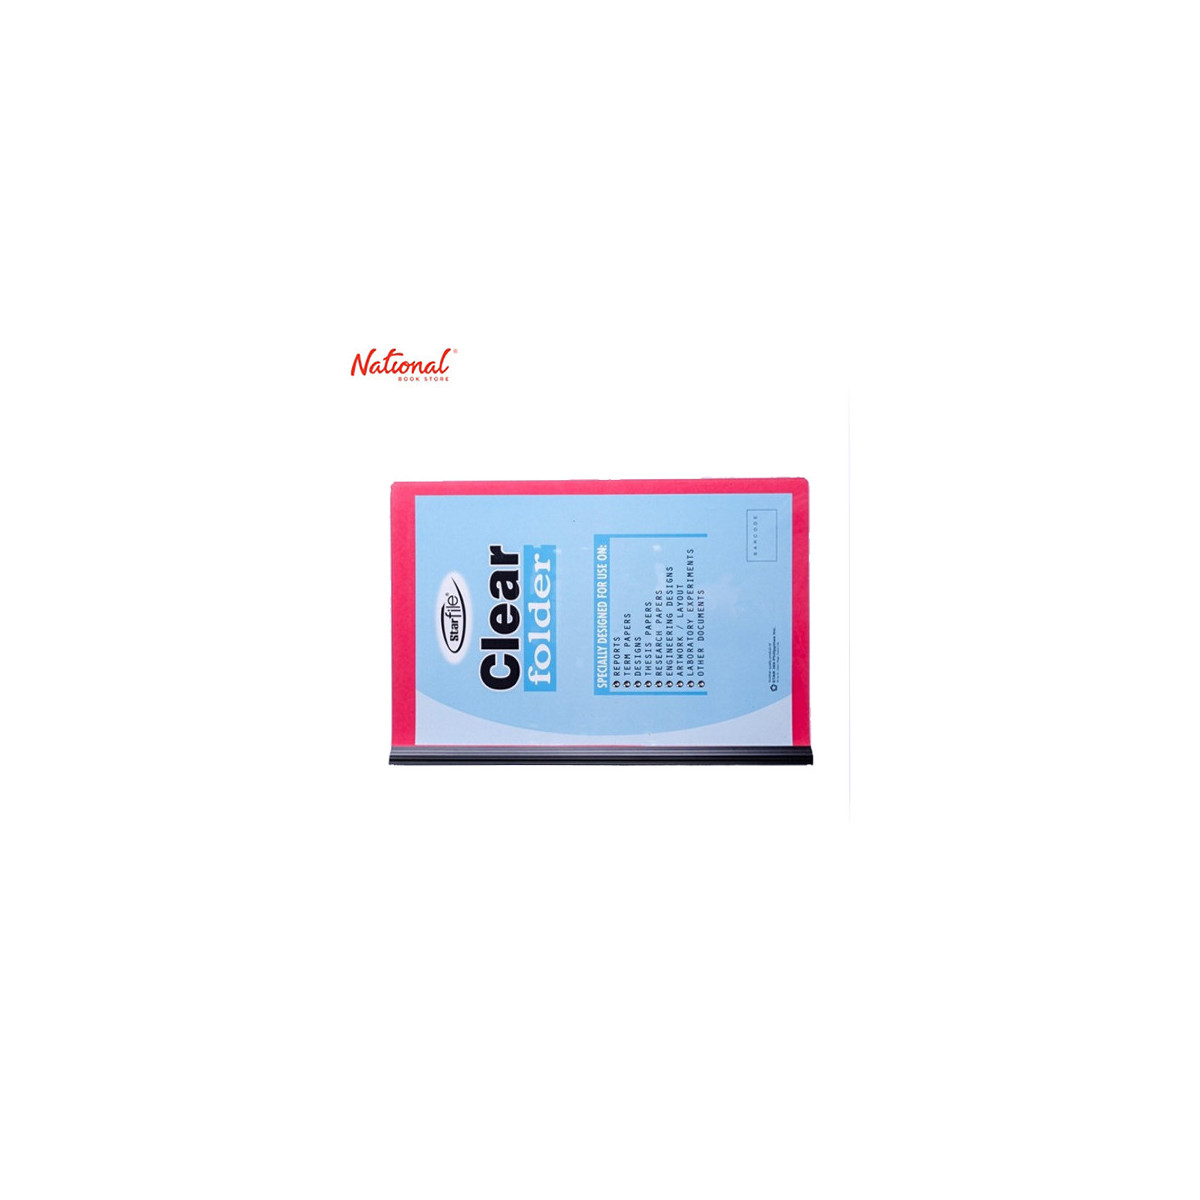 StarFile Sliding Clear Folder Short and Long - Red Back Clear Front for  Presentations and Reports - Supplies 24/7 Delivery